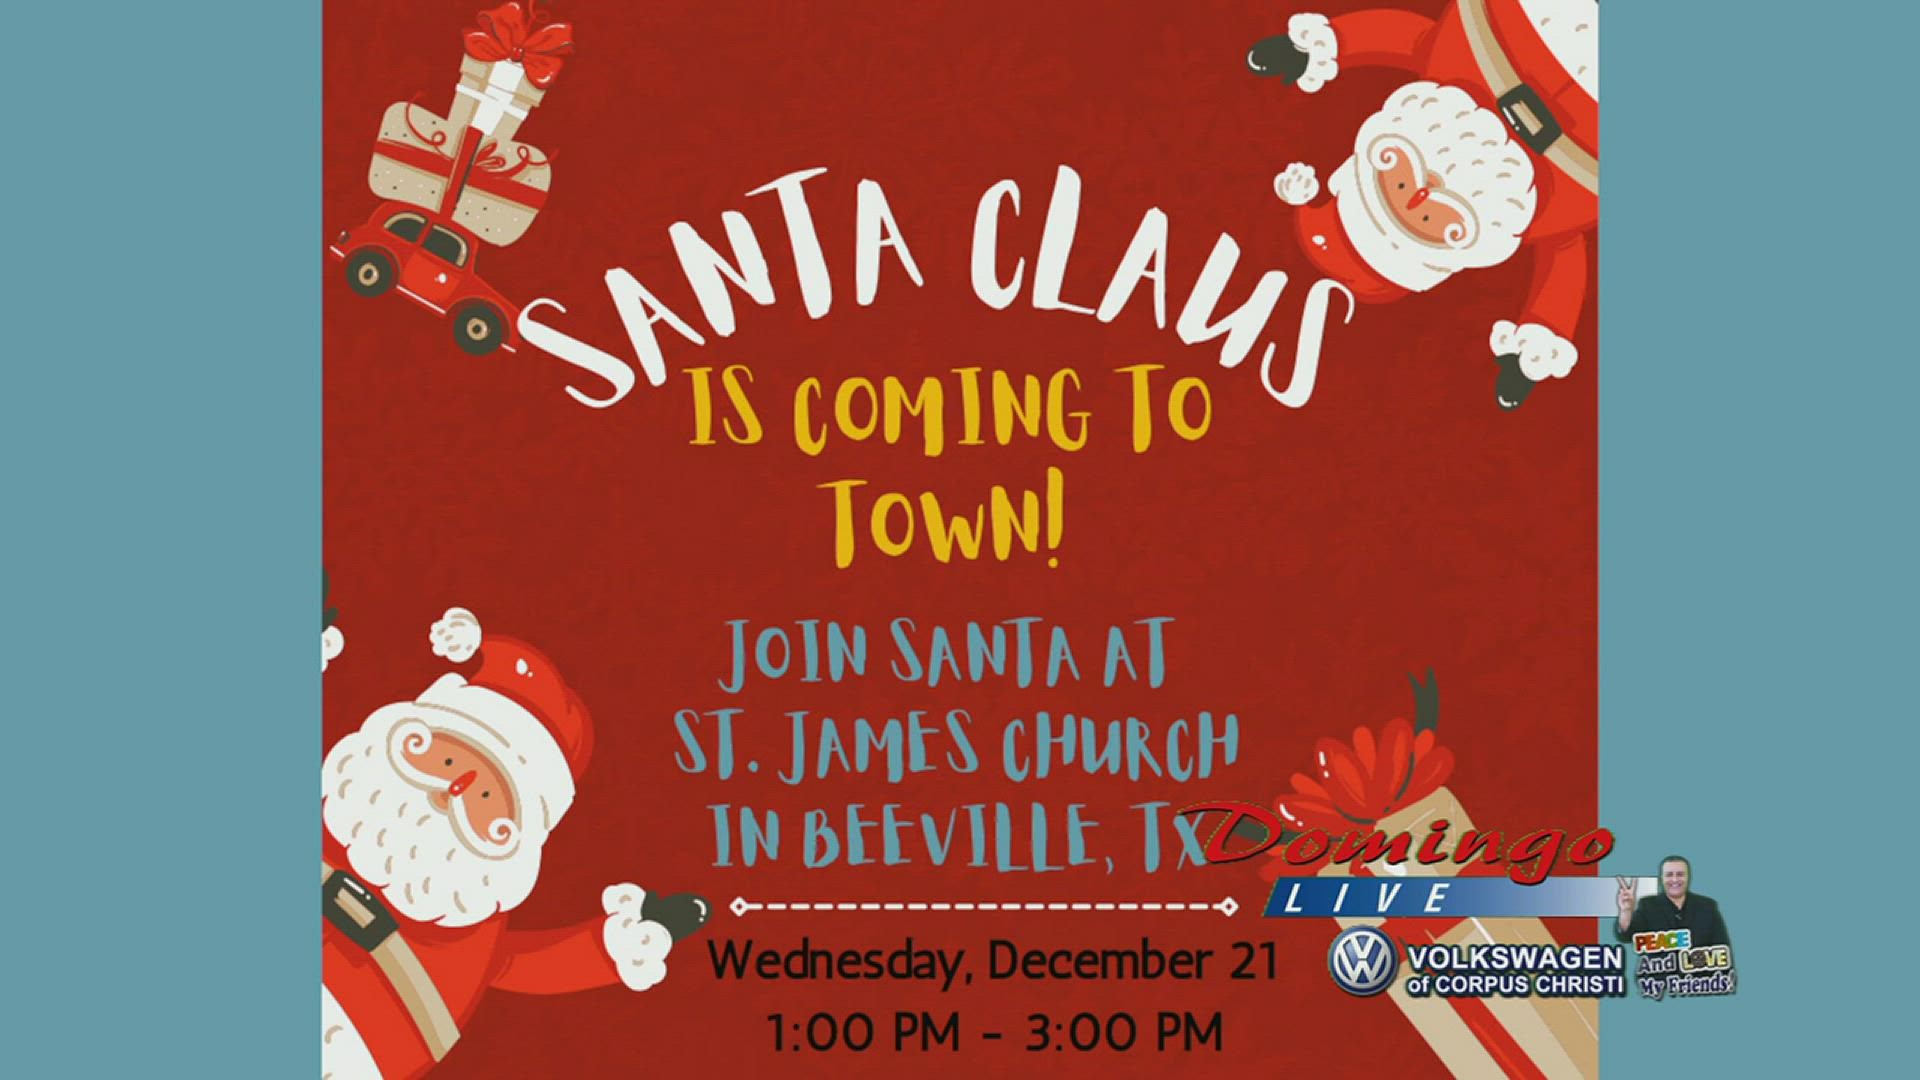 Susana Morón with St. James Church in Beeville joined us live to invite the public to Beeville's "Santa Claus is Coming to Town" event on Dec. 21.